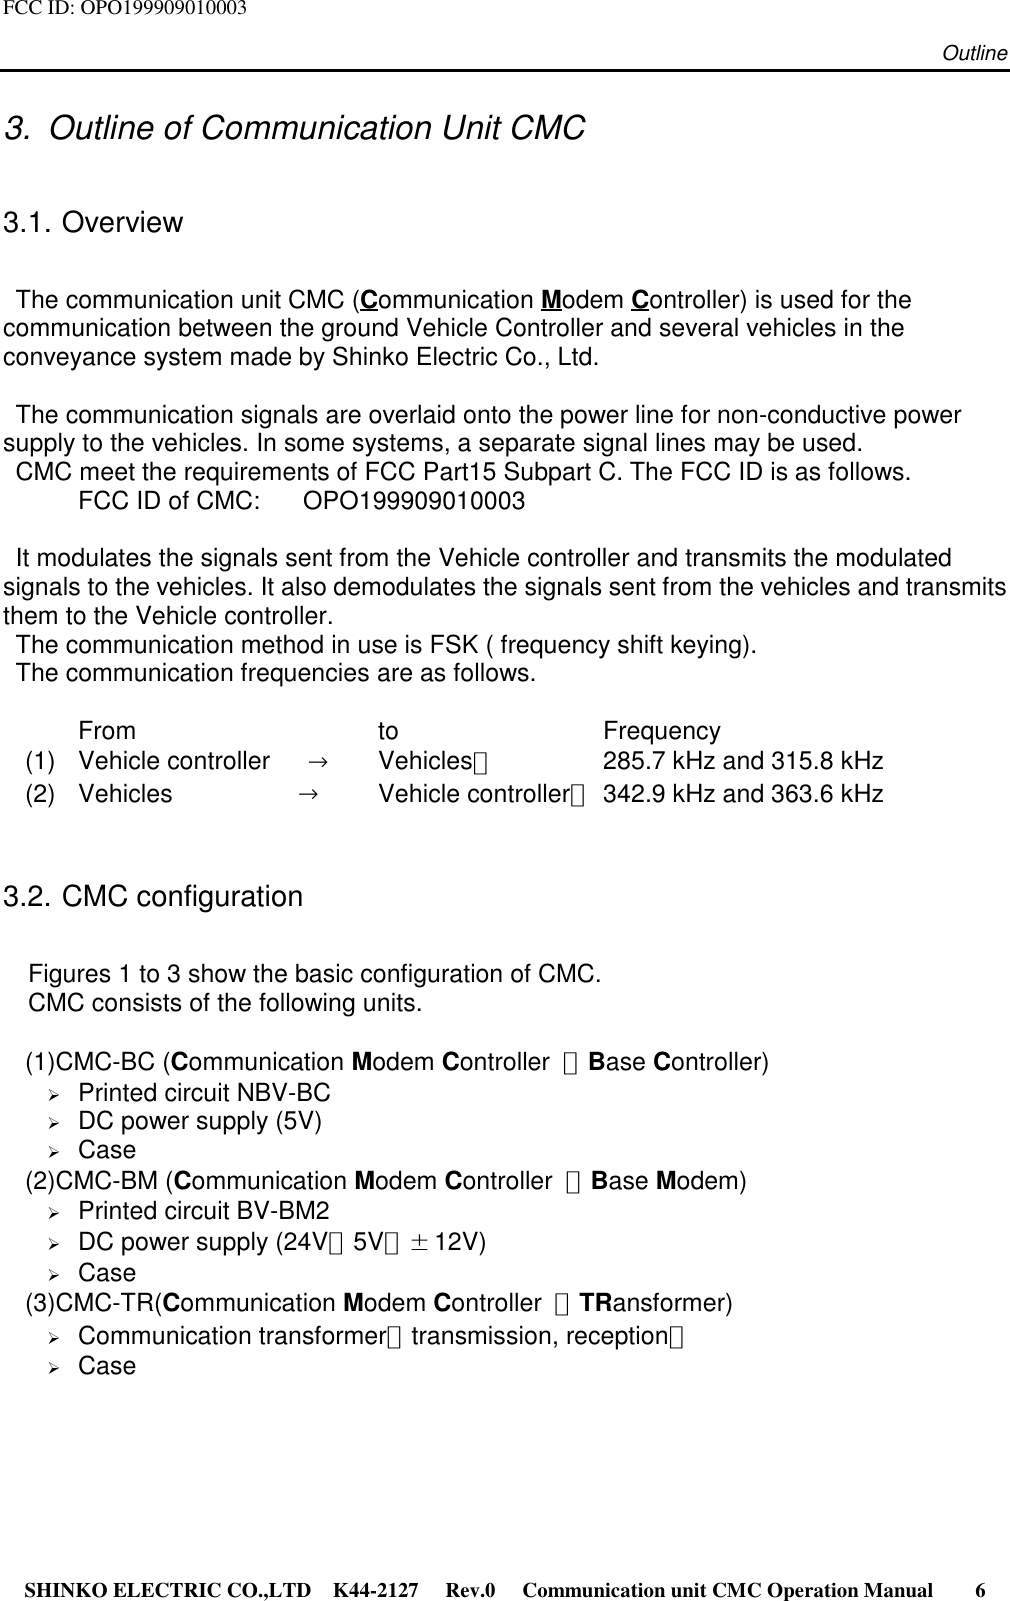 FCC ID: OPO199909010003 Outline SHINKO ELECTRIC CO.,LTD K44-2127   Rev.0   Communication unit CMC Operation Manual     63.  Outline of Communication Unit CMC3.1. Overview  The communication unit CMC (Communication Modem Controller) is used for thecommunication between the ground Vehicle Controller and several vehicles in theconveyance system made by Shinko Electric Co., Ltd.  The communication signals are overlaid onto the power line for non-conductive powersupply to the vehicles. In some systems, a separate signal lines may be used.  CMC meet the requirements of FCC Part15 Subpart C. The FCC ID is as follows.FCC ID of CMC:  OPO199909010003  It modulates the signals sent from the Vehicle controller and transmits the modulatedsignals to the vehicles. It also demodulates the signals sent from the vehicles and transmitsthem to the Vehicle controller.  The communication method in use is FSK ( frequency shift keying).  The communication frequencies are as follows.   From to Frequency(1) Vehicle controller   →Vehicles：  285.7 kHz and 315.8 kHz(2) Vehicles          →Vehicle controller：342.9 kHz and 363.6 kHz3.2. CMC configuration    Figures 1 to 3 show the basic configuration of CMC.    CMC consists of the following units.(1)CMC-BC (Communication Modem Controller  ：Base Controller)¾ Printed circuit NBV-BC¾ DC power supply (5V)¾ Case(2)CMC-BM (Communication Modem Controller  ：Base Modem)¾ Printed circuit BV-BM2¾ DC power supply (24V，5V，±12V)¾ Case(3)CMC-TR(Communication Modem Controller  ：TRansformer)¾ Communication transformer（transmission, reception）¾ Case   